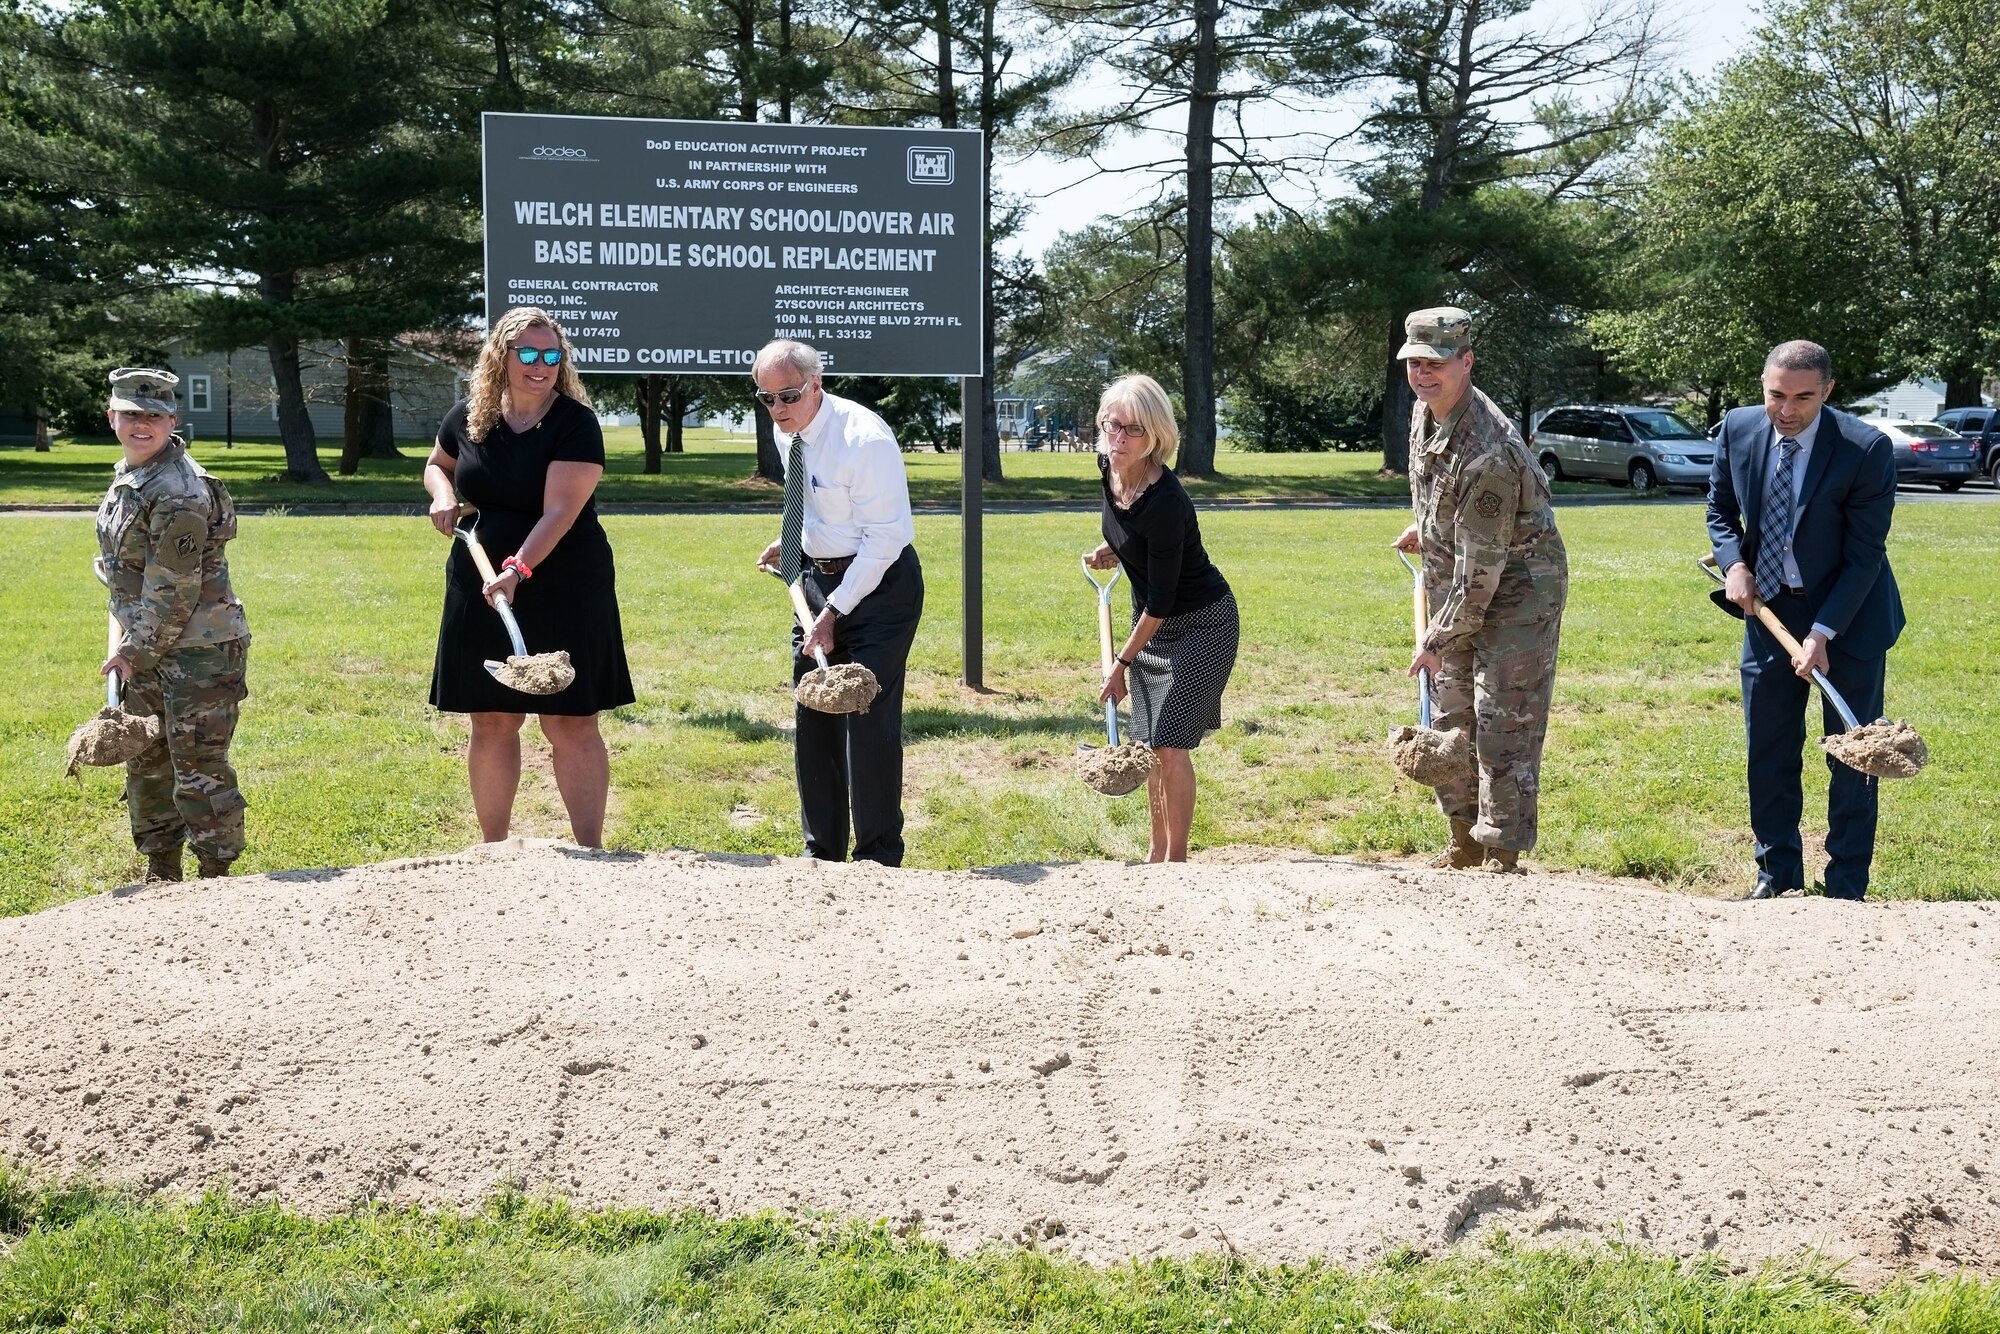 Pictured from the left, Lt. Col. Kristen Dahle, U.S. Army Corps of Engineers Philadelphia District commander; Jessica Marelli, Caesar Rodney School District Board of Education president, Camden, Del.; Sen. Tom Carper, D-Del.; Kate Rohrer, Kent and Sussex counties, Delaware director for Sen. Chris Coons, D-Del.; Col. Joel Safranek, 436th Airlift Wing commander; and Hossam Ibrahim, Dobco, Inc. vice president, break ground for the new Welch Elementary School/Dover Air Base Middle School June 3, 2019, in the family housing area at Dover Air Force Base, Del. The $48 million project, federally funded by the Department of Defense Education Activity, will be built on the football field across the street from the Youth Center and adjacent to the existing elementary and middle schools. Scheduled to open at the beginning of the 2021 school year, the new building will have over 105,000 square feet of learning space for approximately 490 students. (U.S. Air Force photo by Roland Balik)